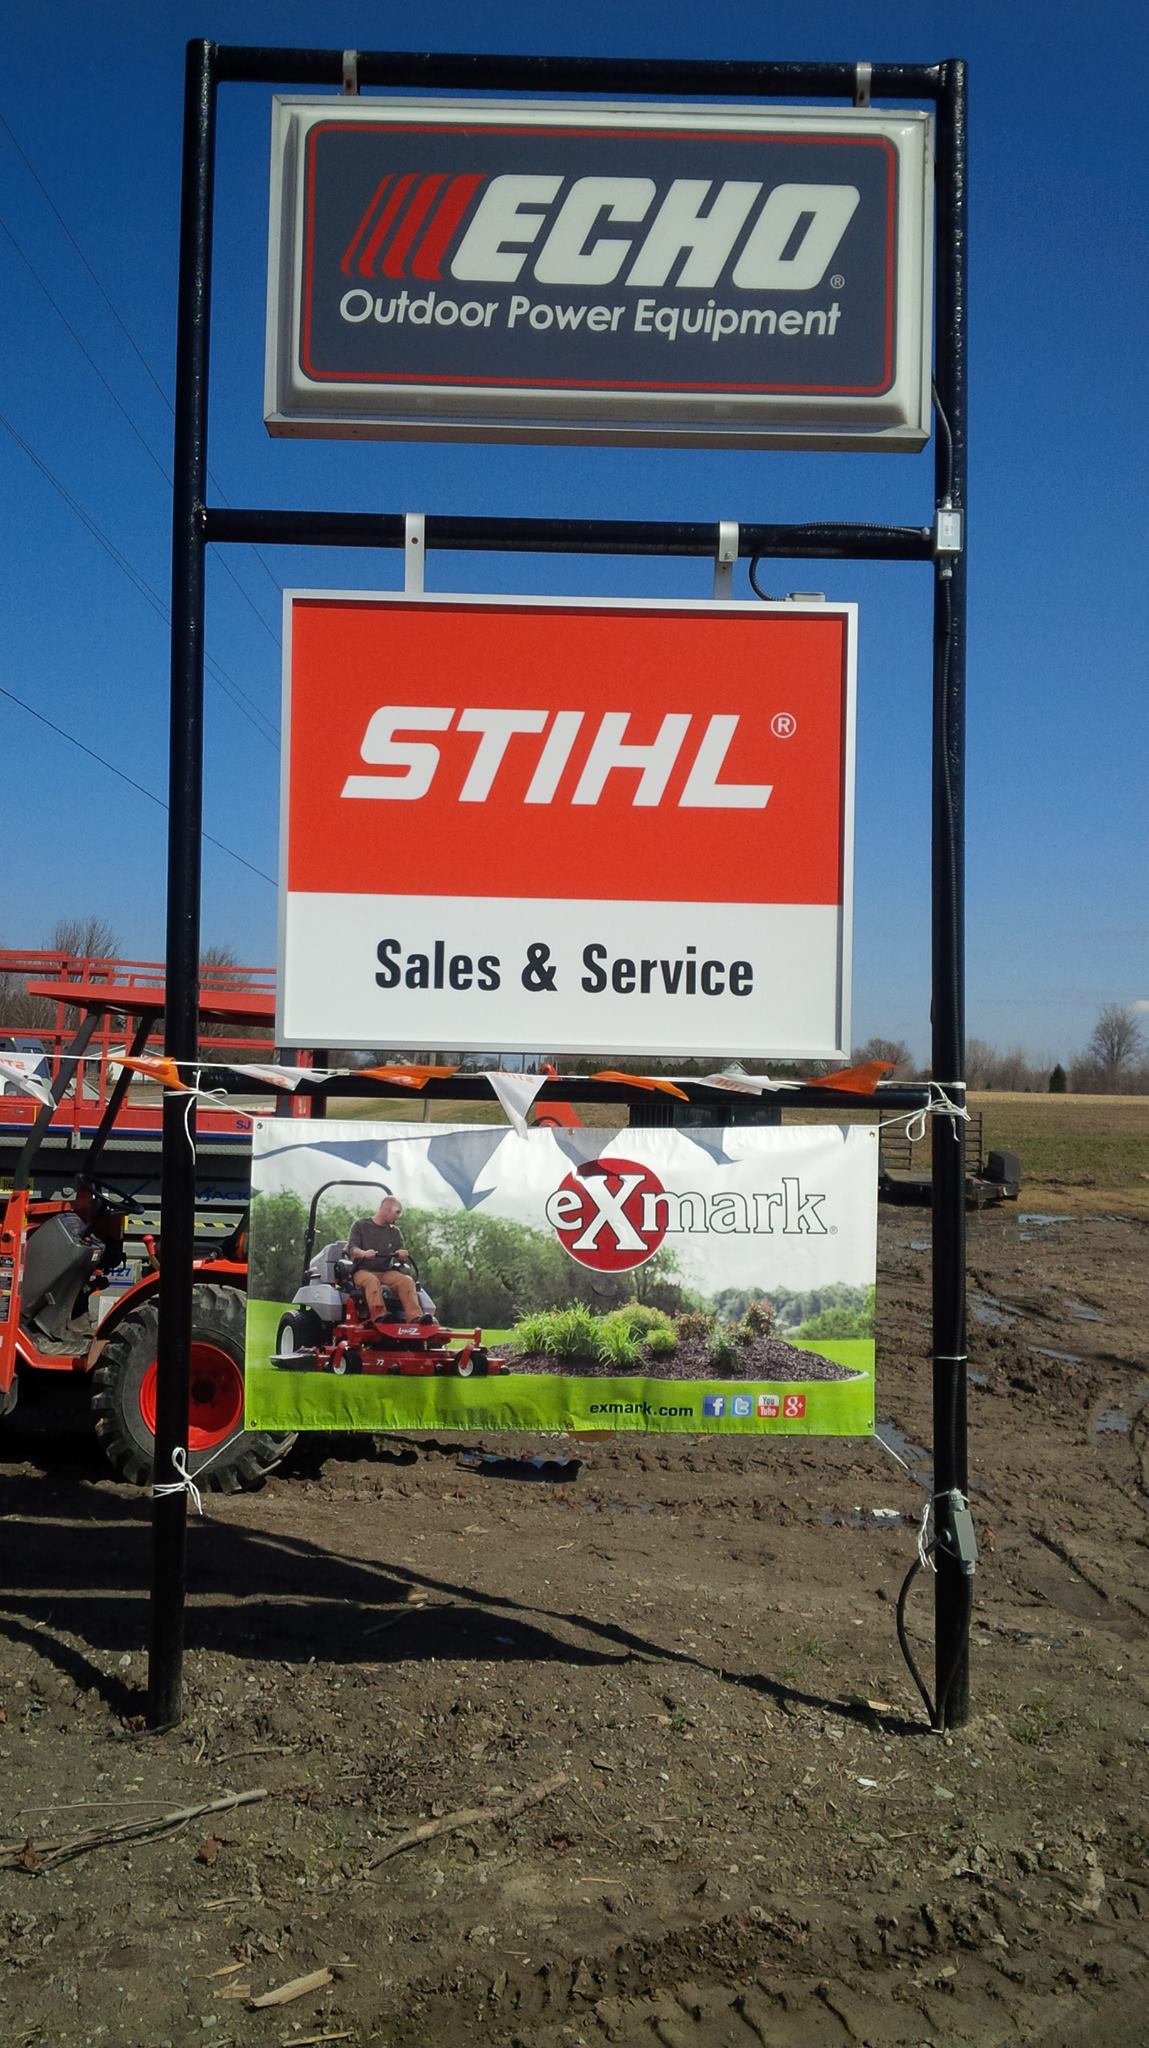 STIHL Dealer Days and Echo National sales event at DNR!